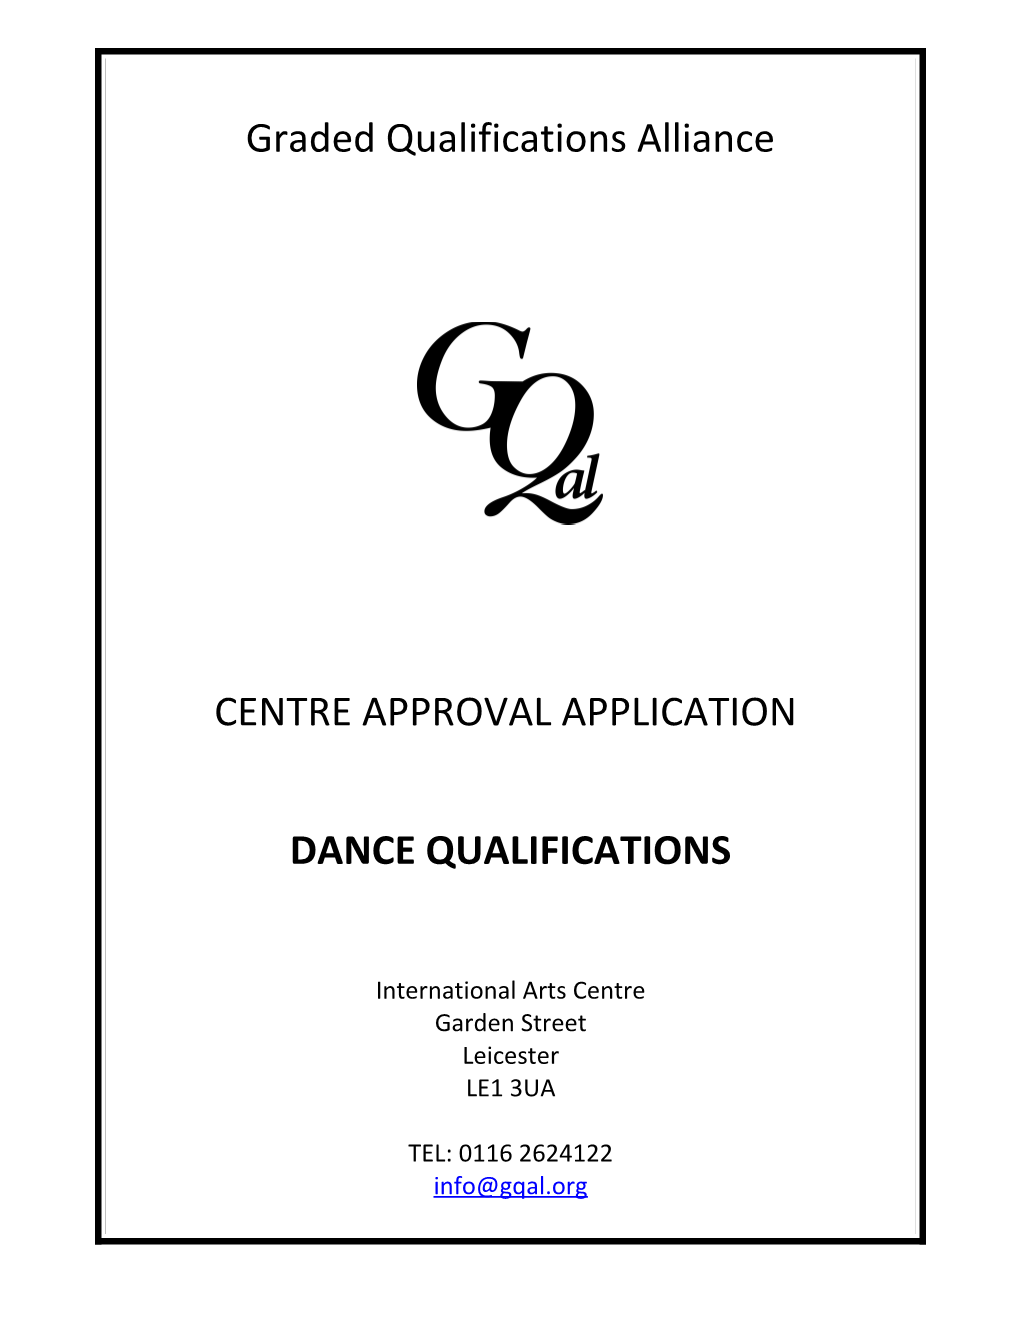 Graded Qualifications Alliance